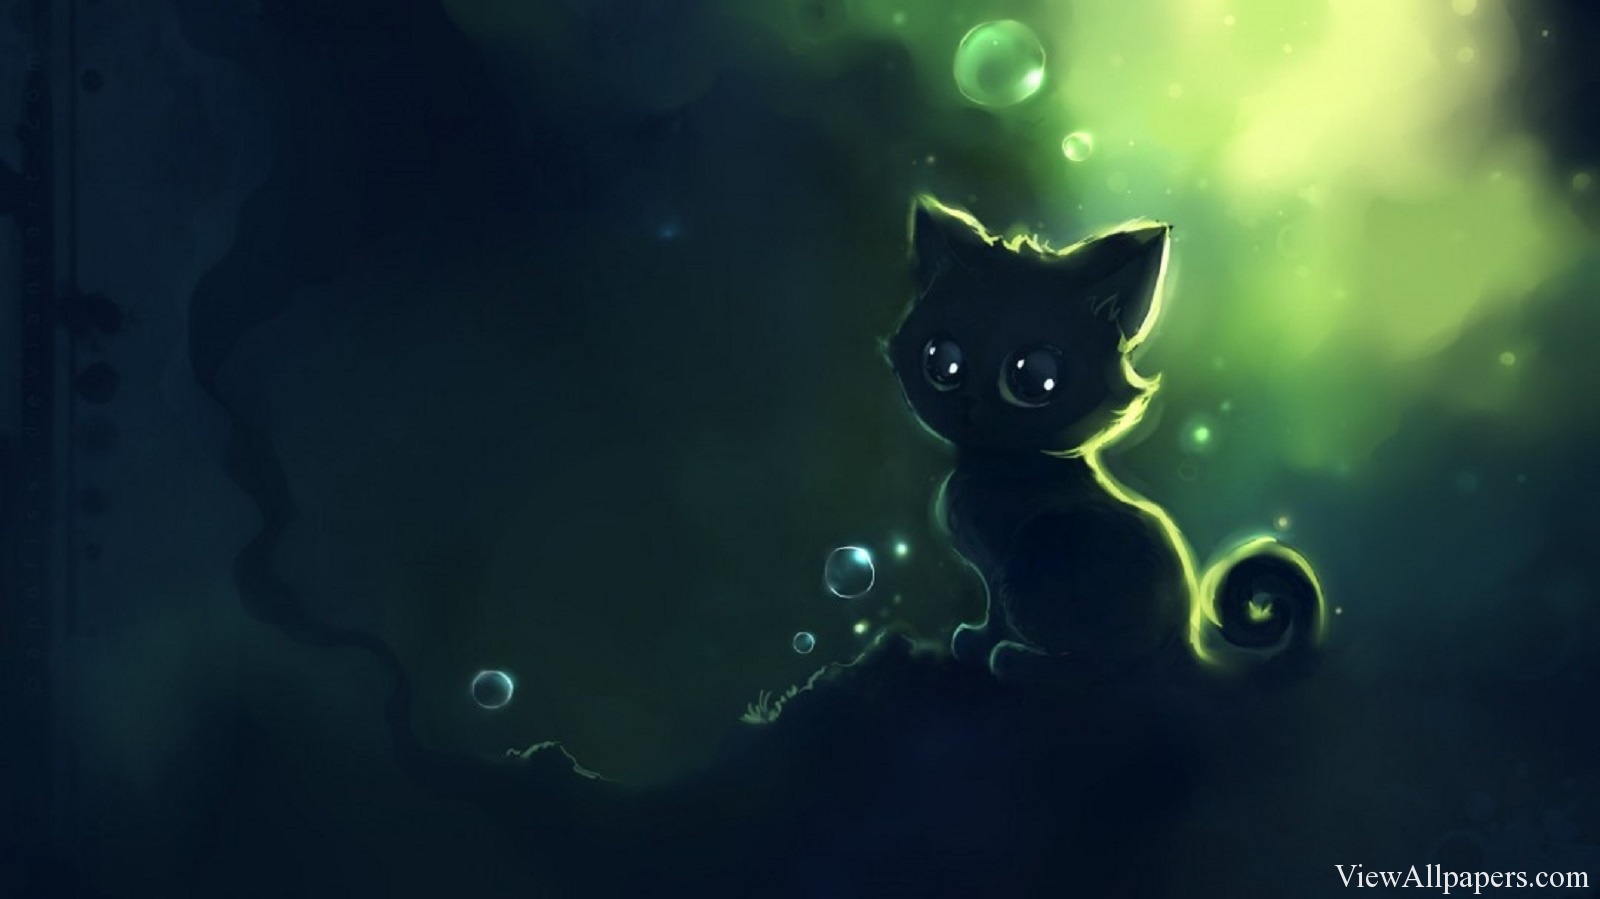 Anime Alone Cat Wallpaper High Resolution download this Anime 1600x899